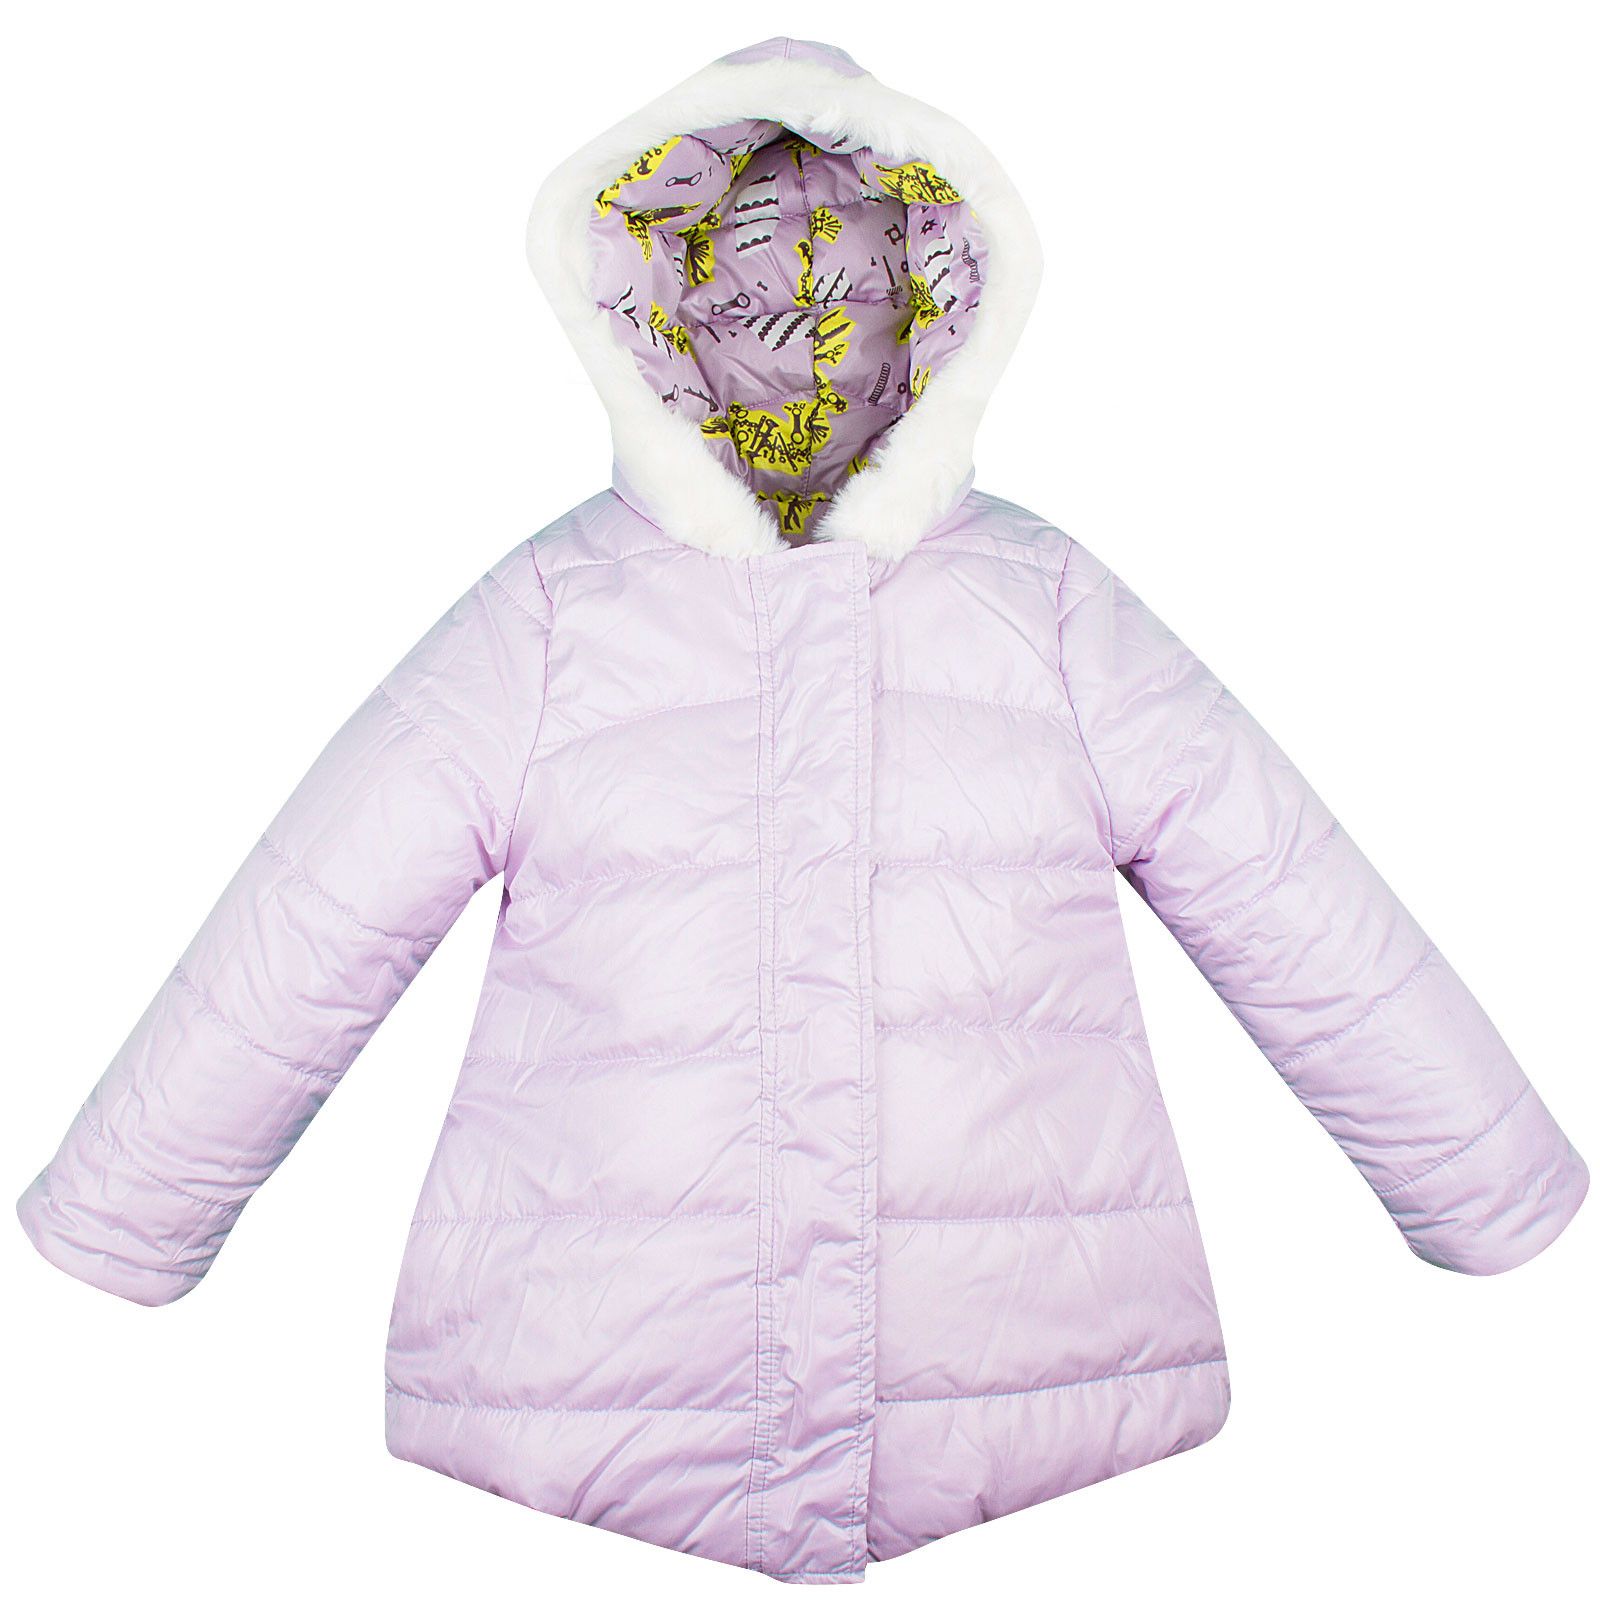 Baby Girls Lavender Monster Reversible Jacket  With Synthetic Fur Trims - CÉMAROSE | Children's Fashion Store - 2